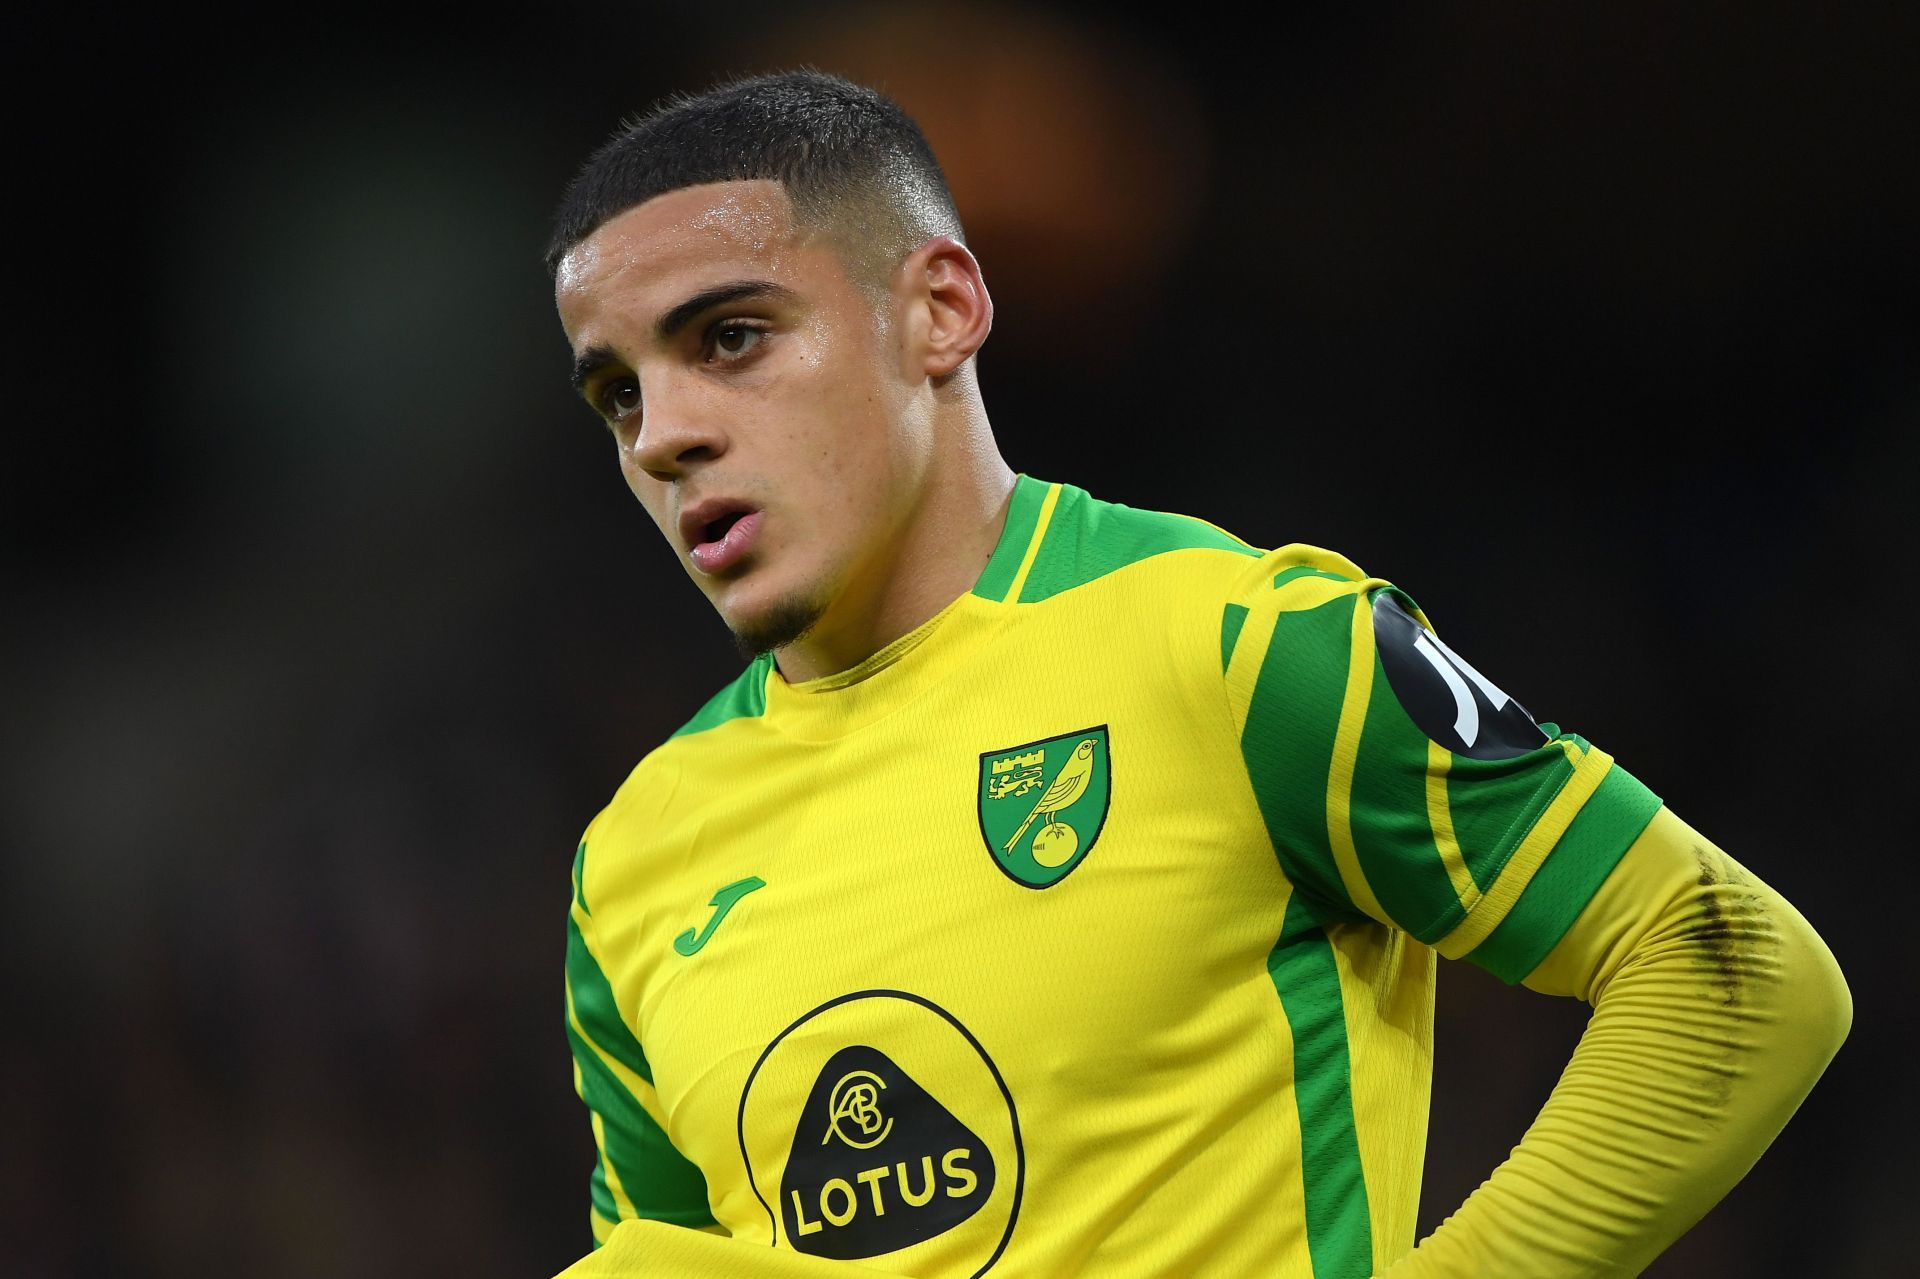 Young Max Aarons of Norwich City could be a potential Manchester United target.